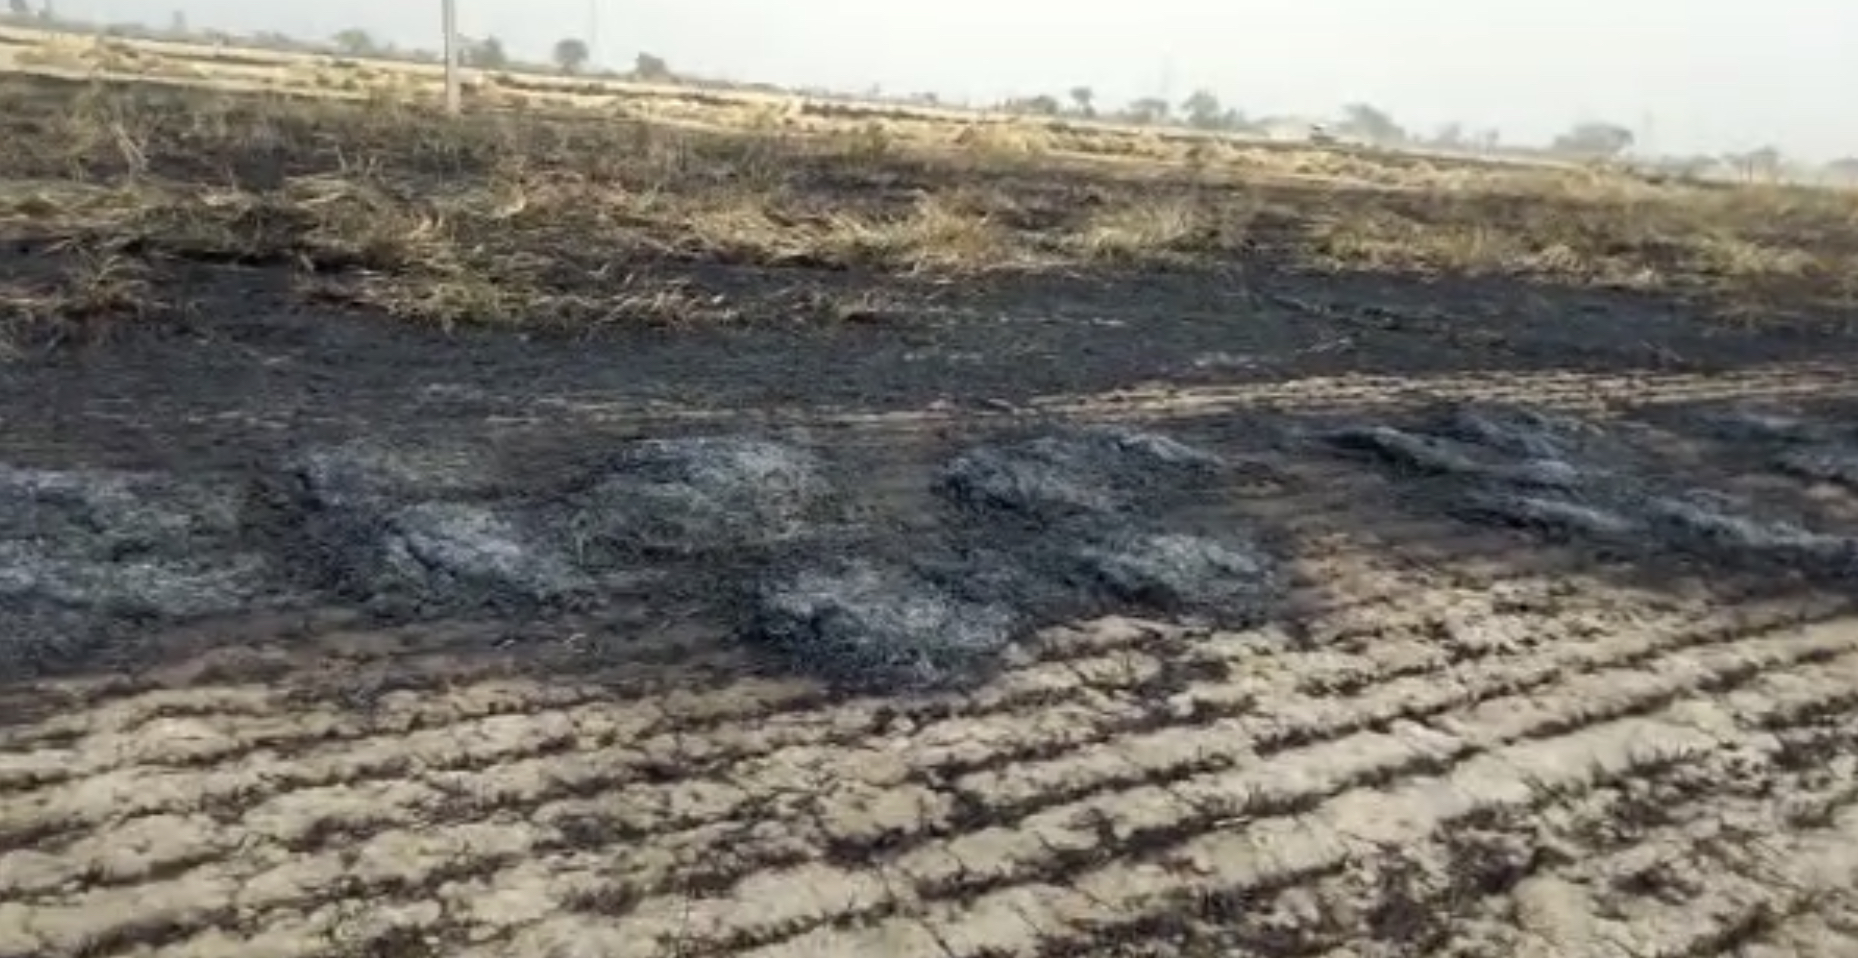 Fire destroys wheat crop on 48 acres in Bhiwani